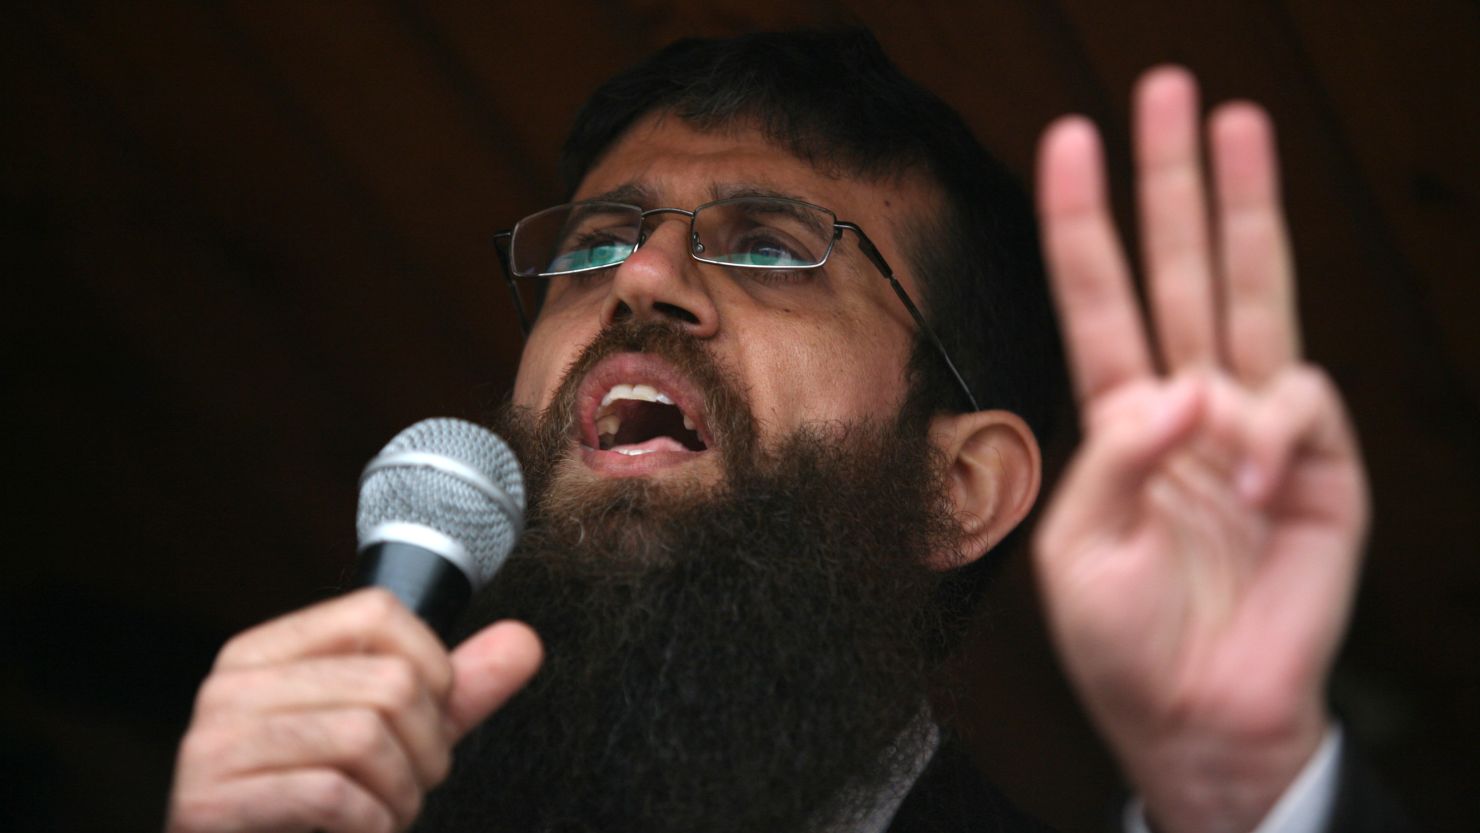 Khader Adnan, a member of Islamic Jihad, was released from an Israeli jail Sunday. In this 2012 photo, he addresses a crowd in the West Bank following a prior release from jail.